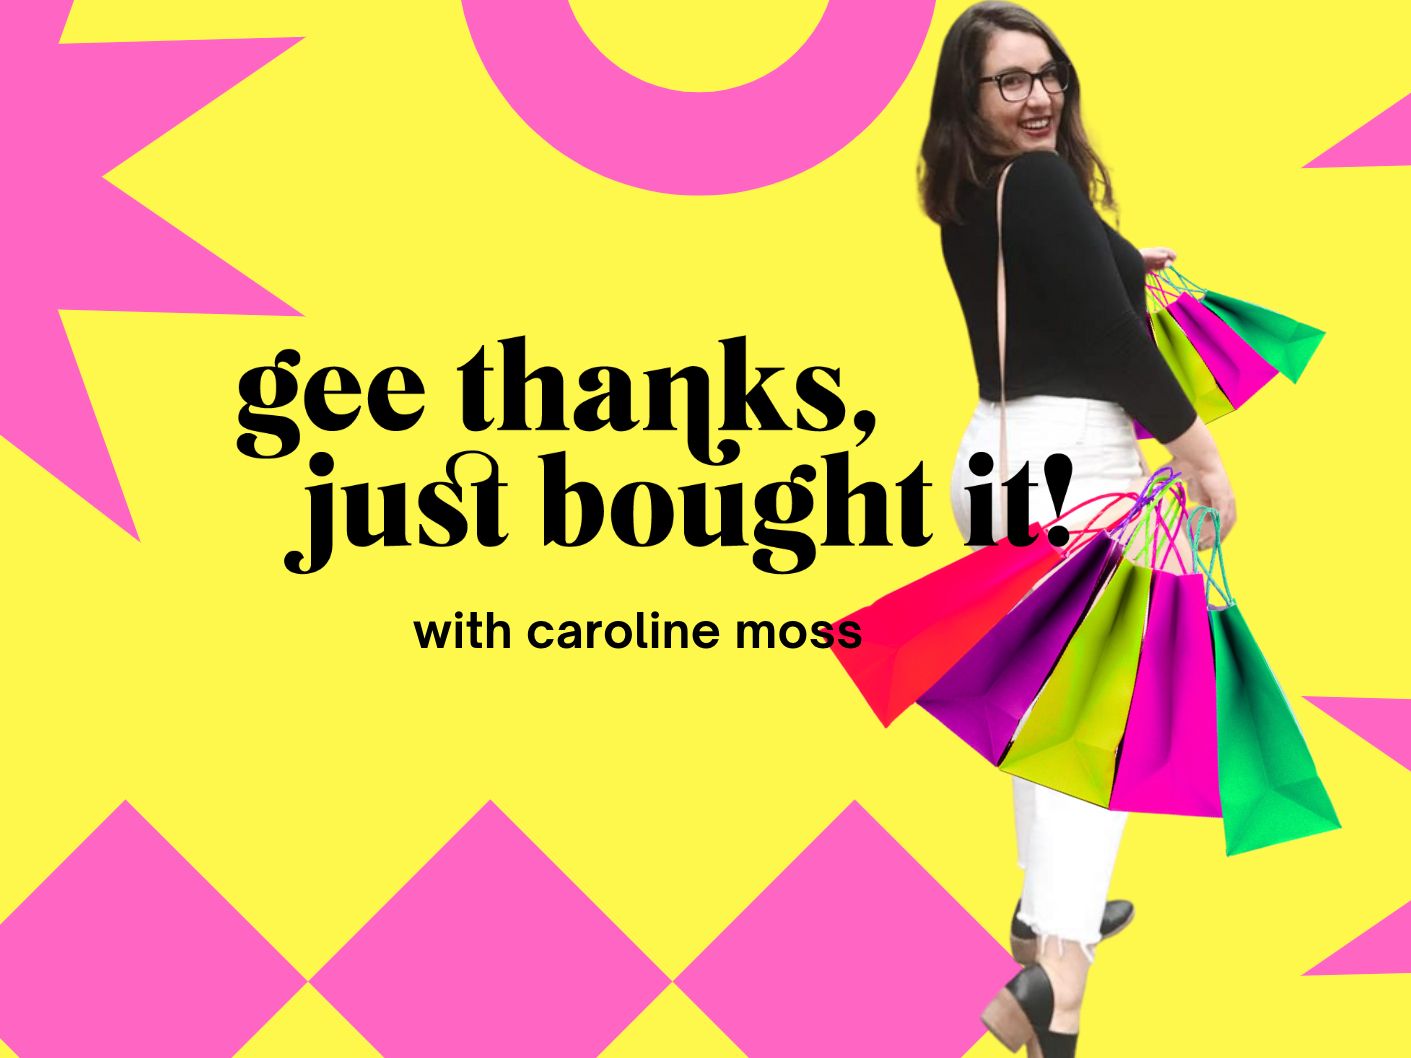 Gee Thanks!  Flagship Store